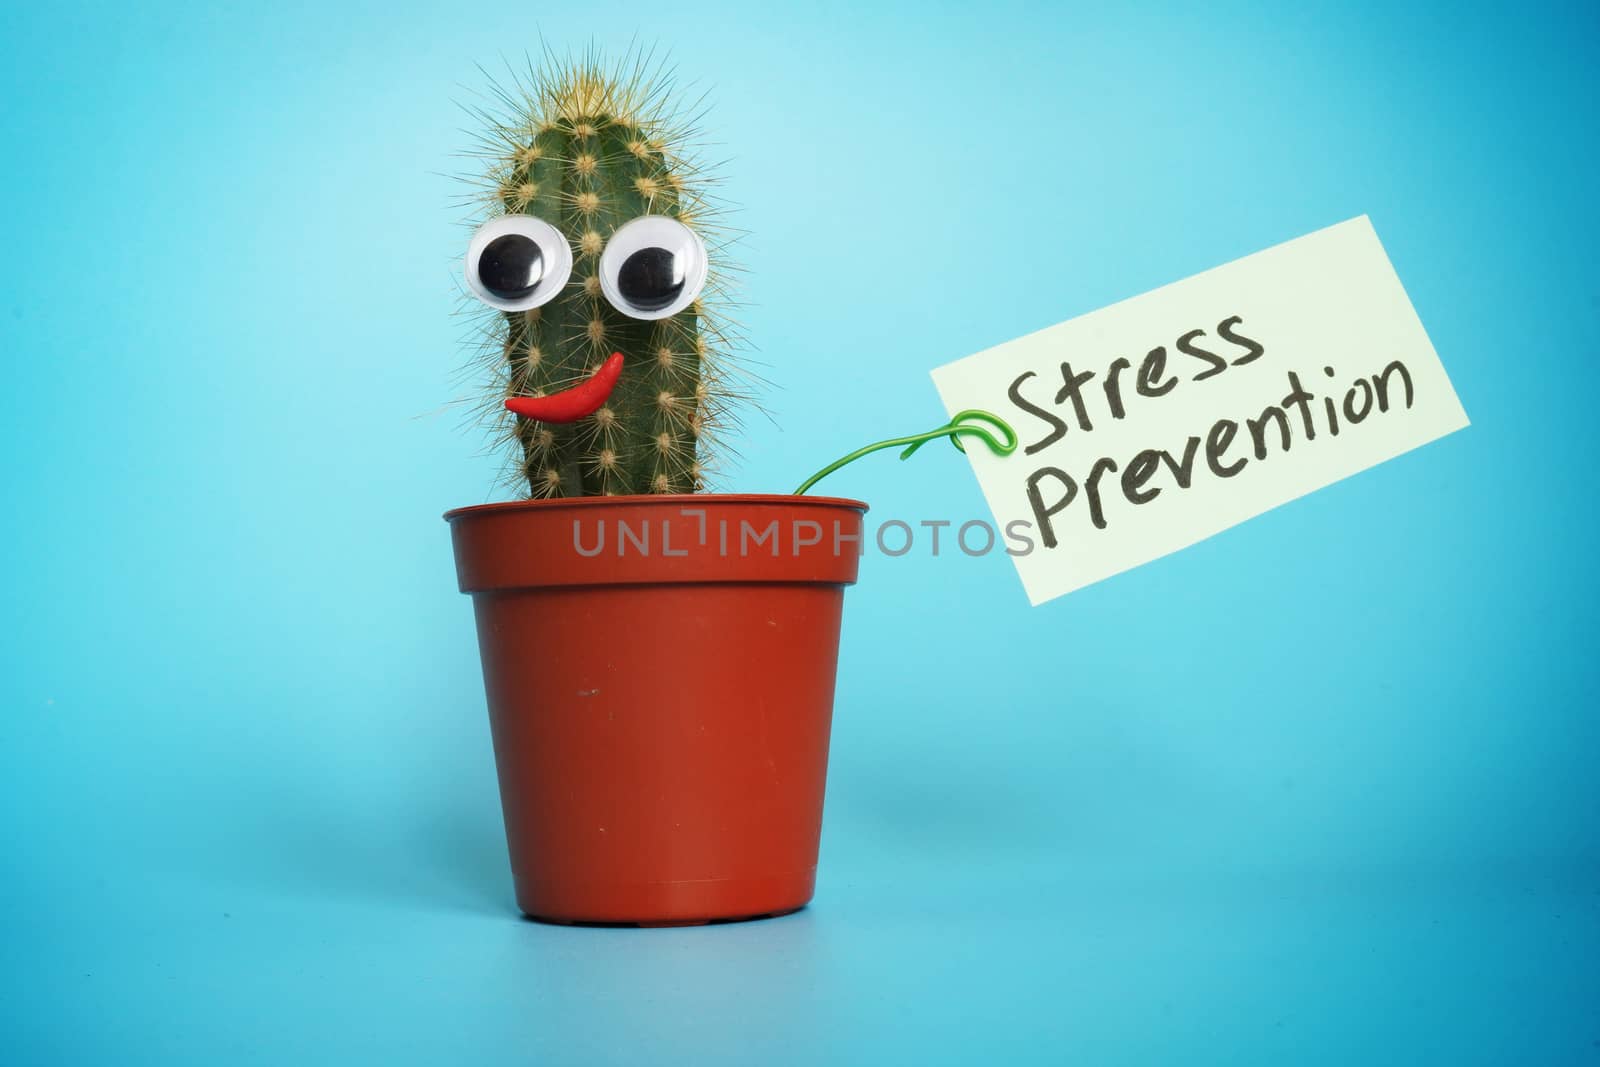 Stress prevention sign and cactus with smile. by designer491